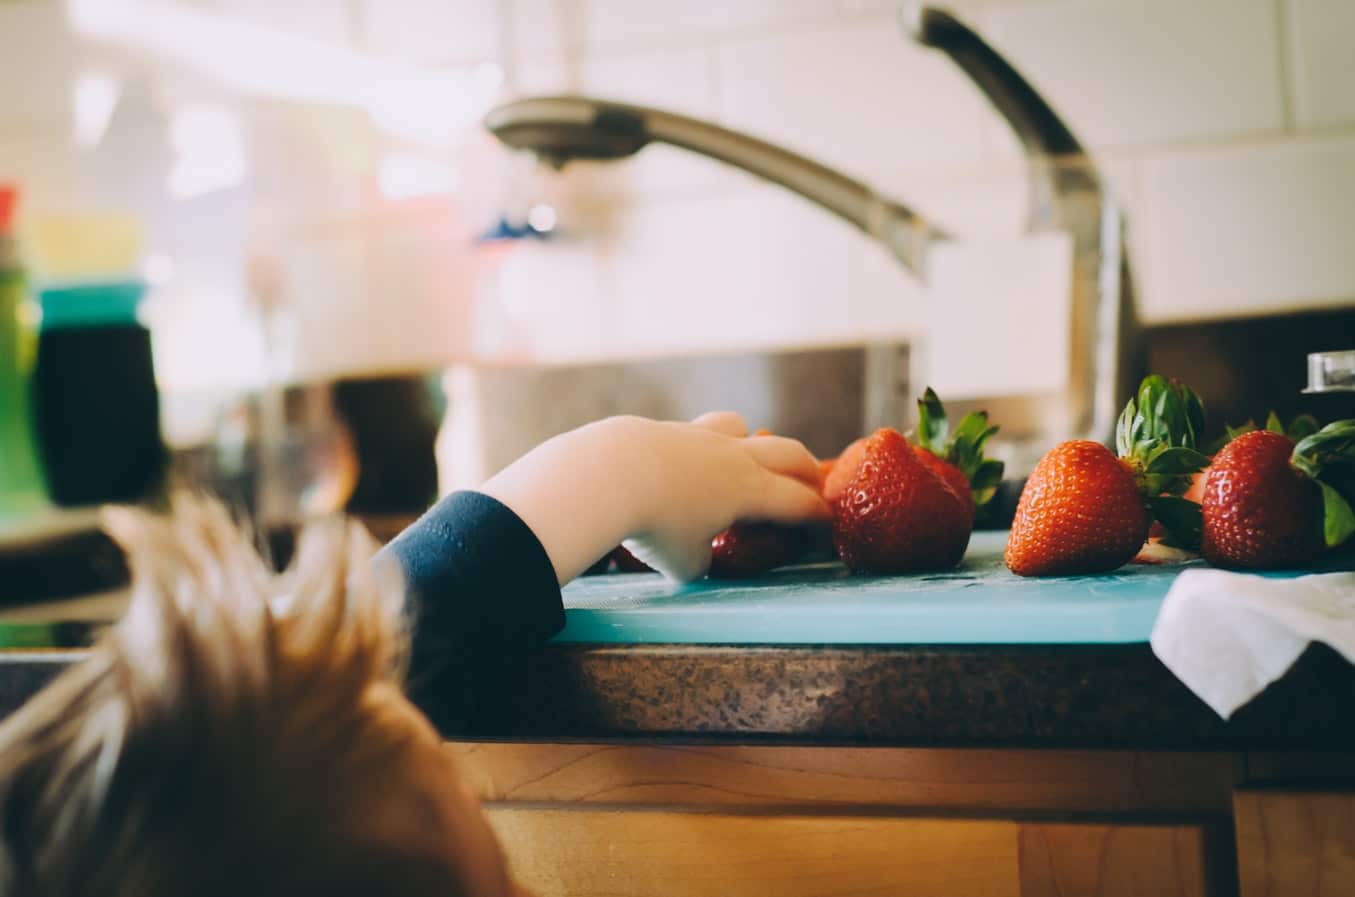 child reaching for a strawberry on the kitchen counter